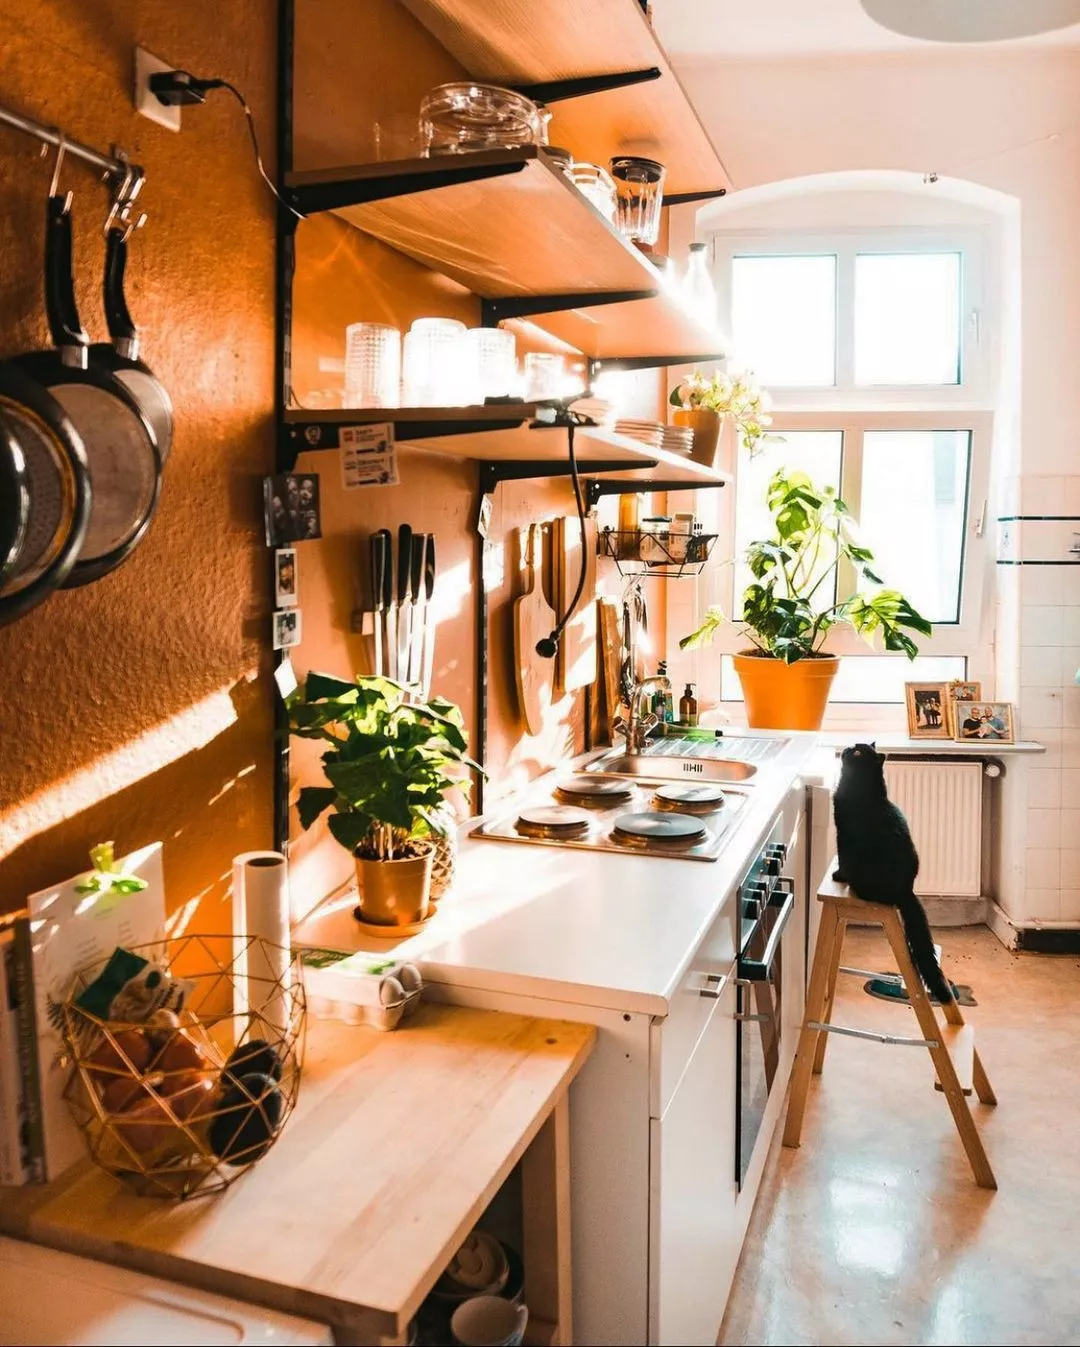 https://www.extraspace.com/blog/wp-content/uploads/2018/07/studio-apartment-storage-tips-make-the-most-of-vertical-space.jpeg.webp